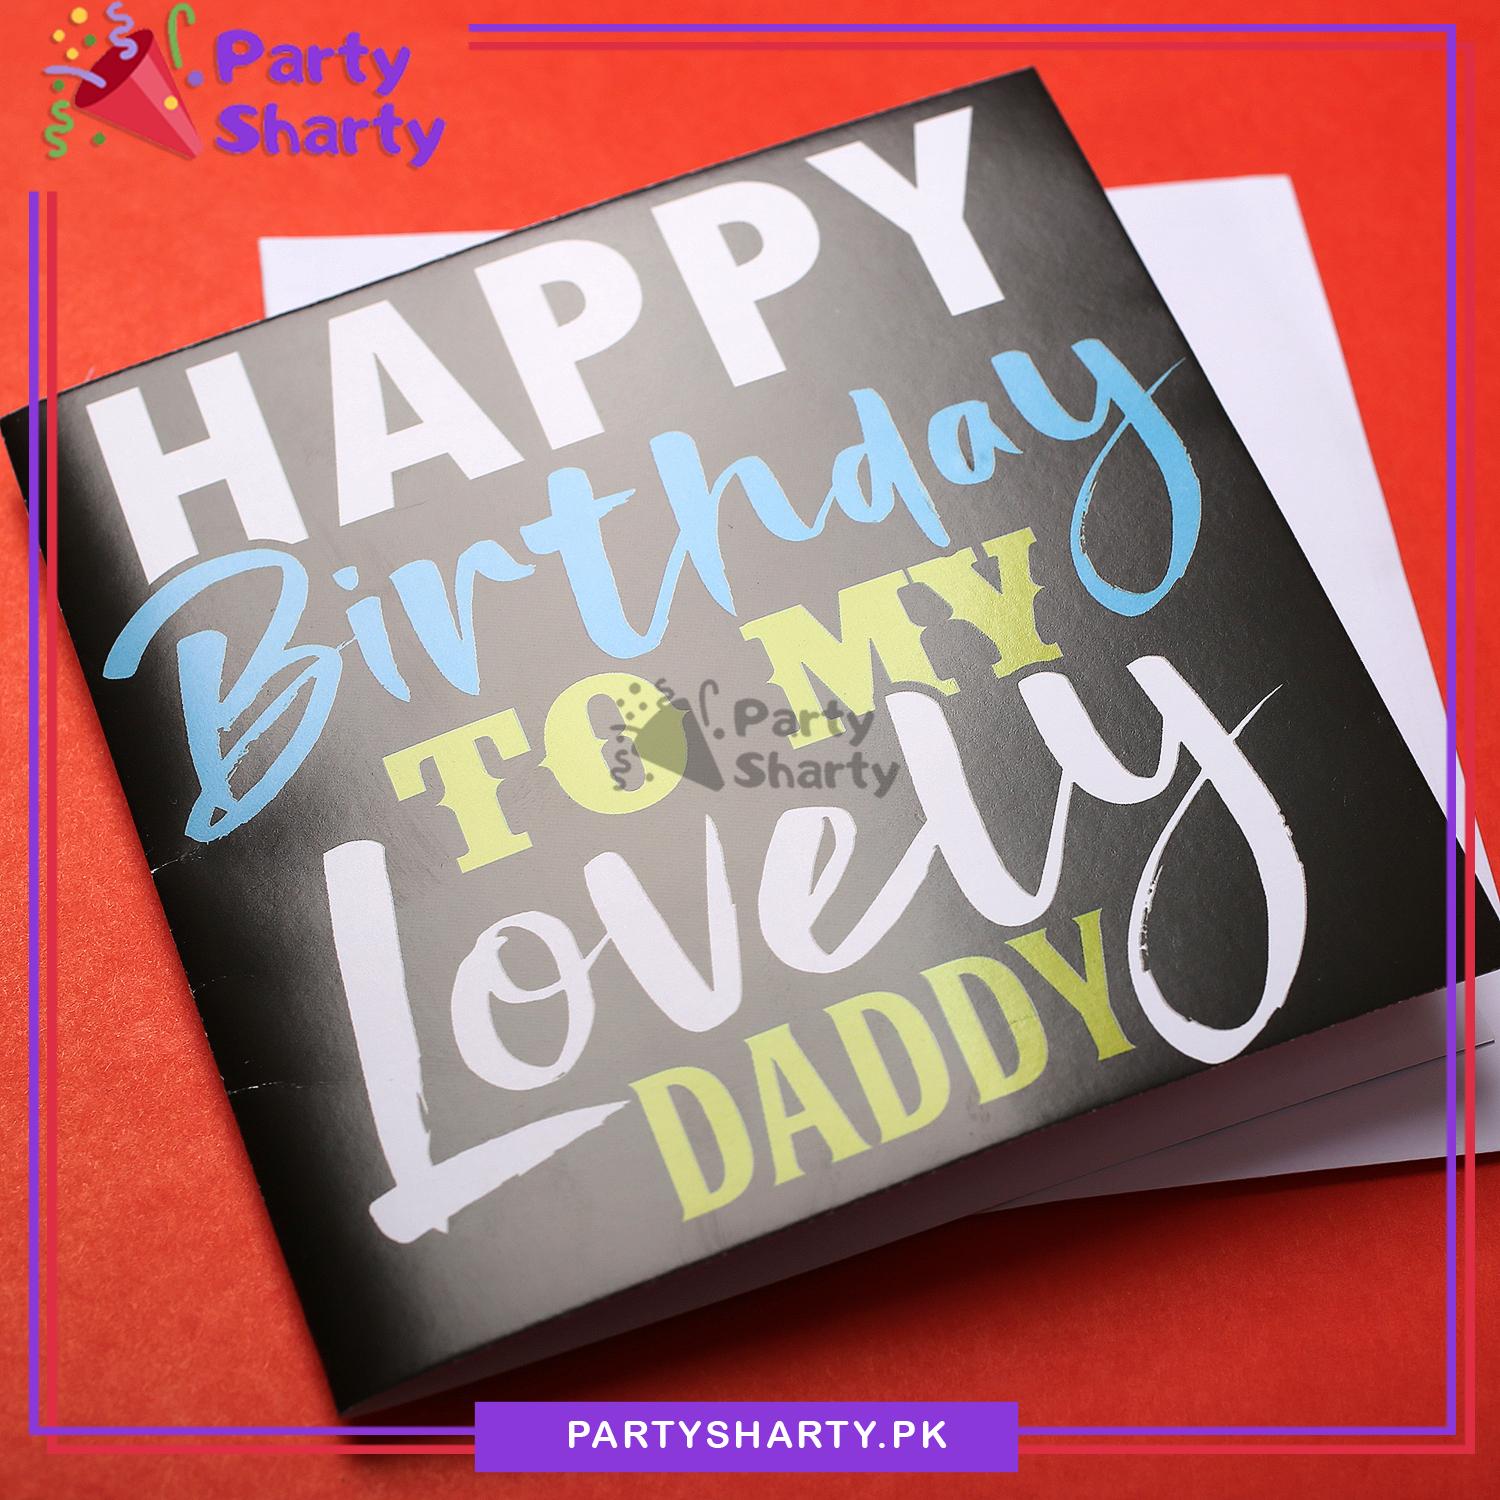 Happy Birthday To My Lovely Daddy Greeting Card